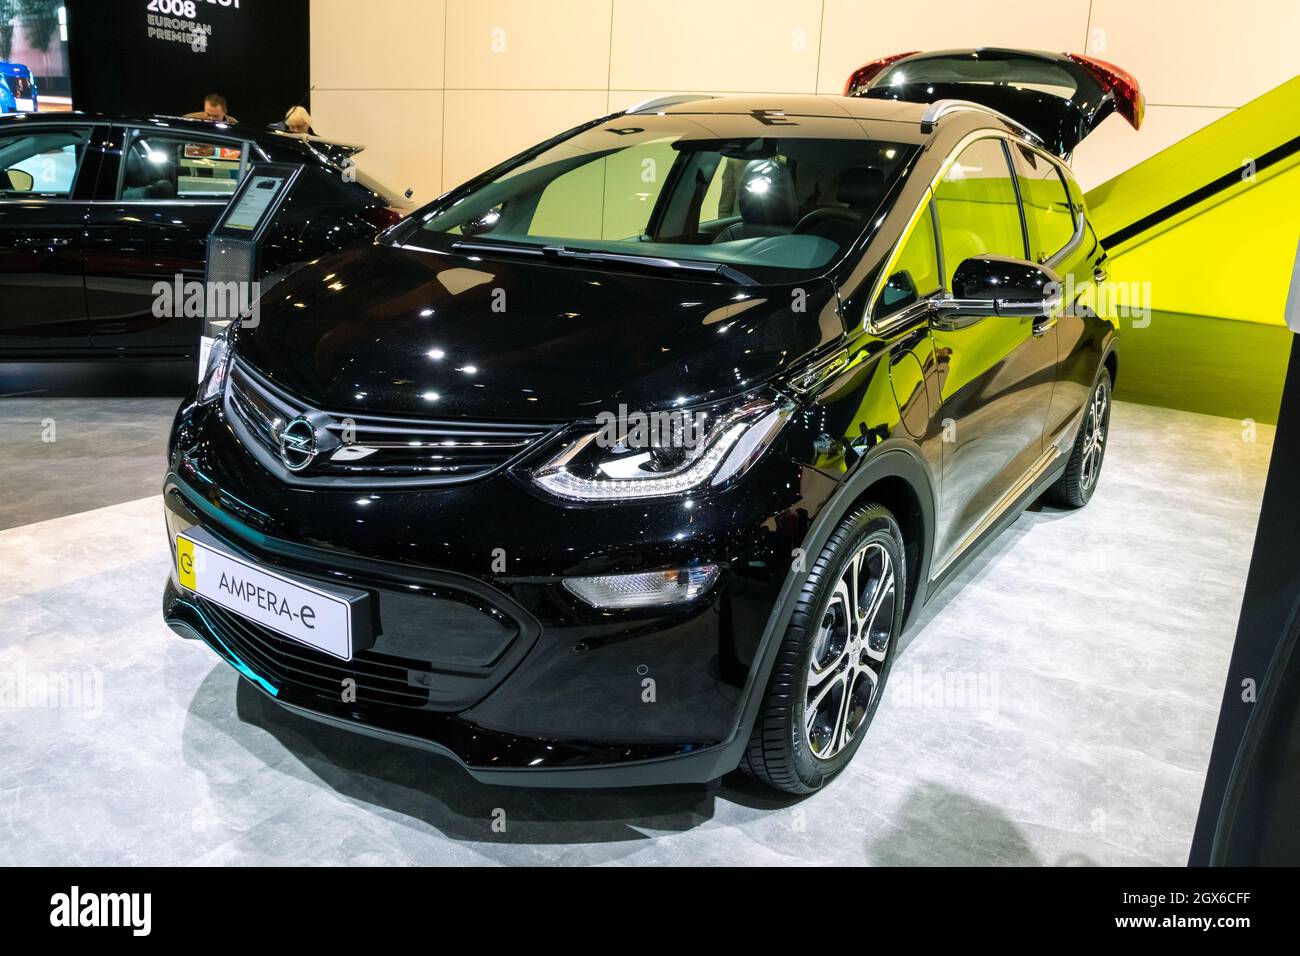 Opel Ampera-e electric car showcased at the Autosalon 2020 Motor Show. Brussels, Belgium - January 9, 2020. Stock Photo